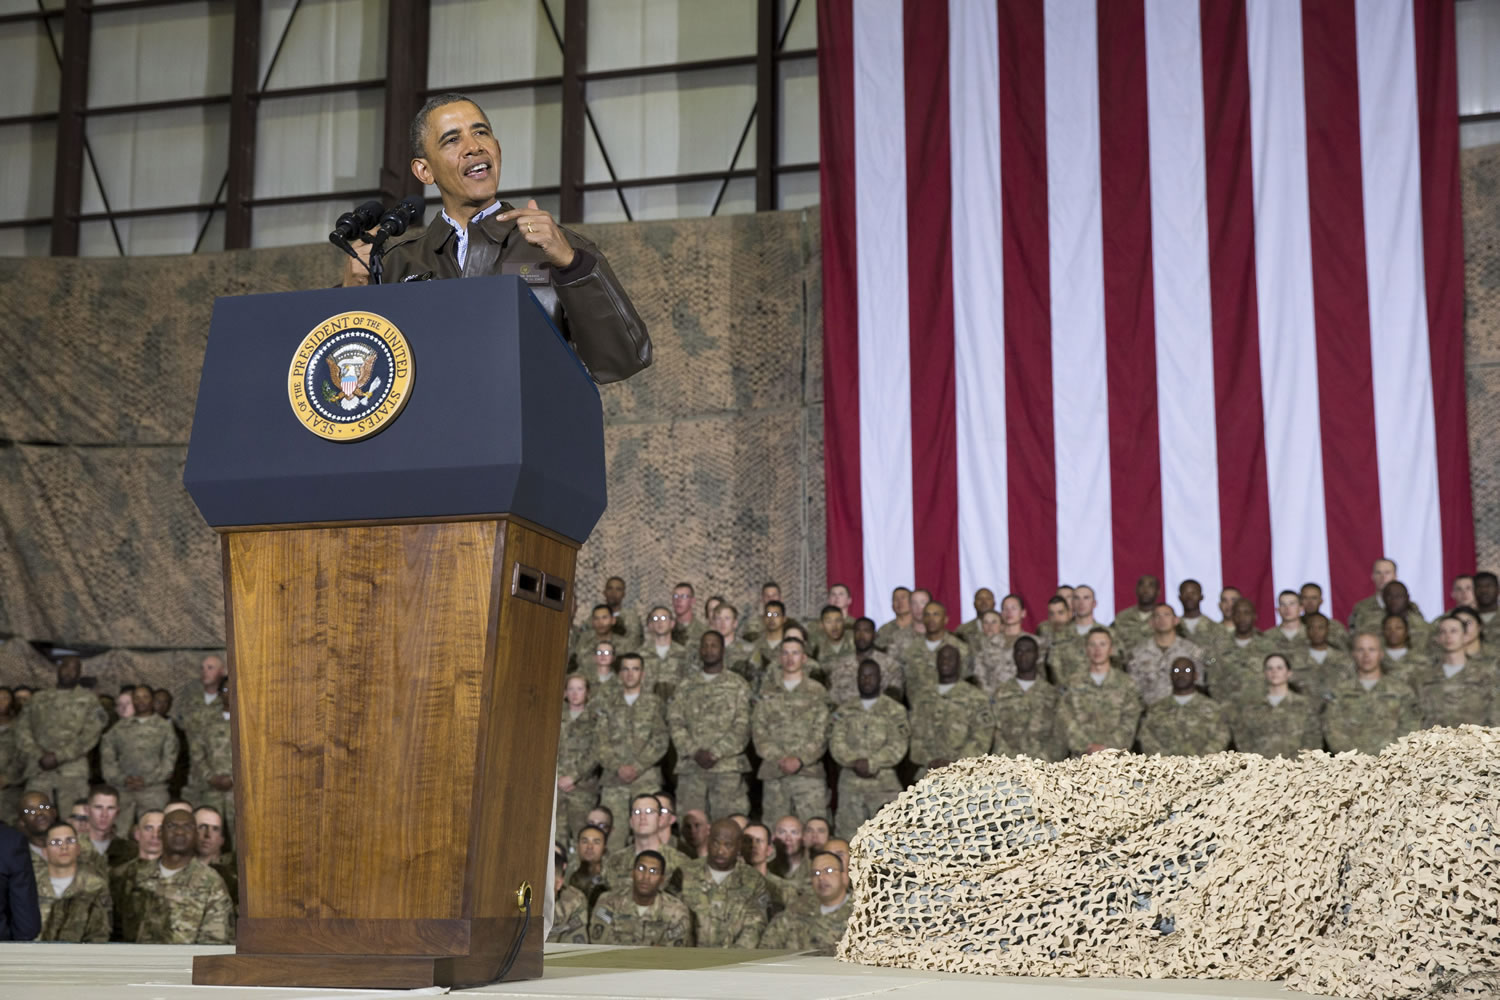 President Barack Obama speaks during a troop rally after arriving at Bagram Air Field for an unannounced visit, north of Kabul, Afghanistan, on May 25.